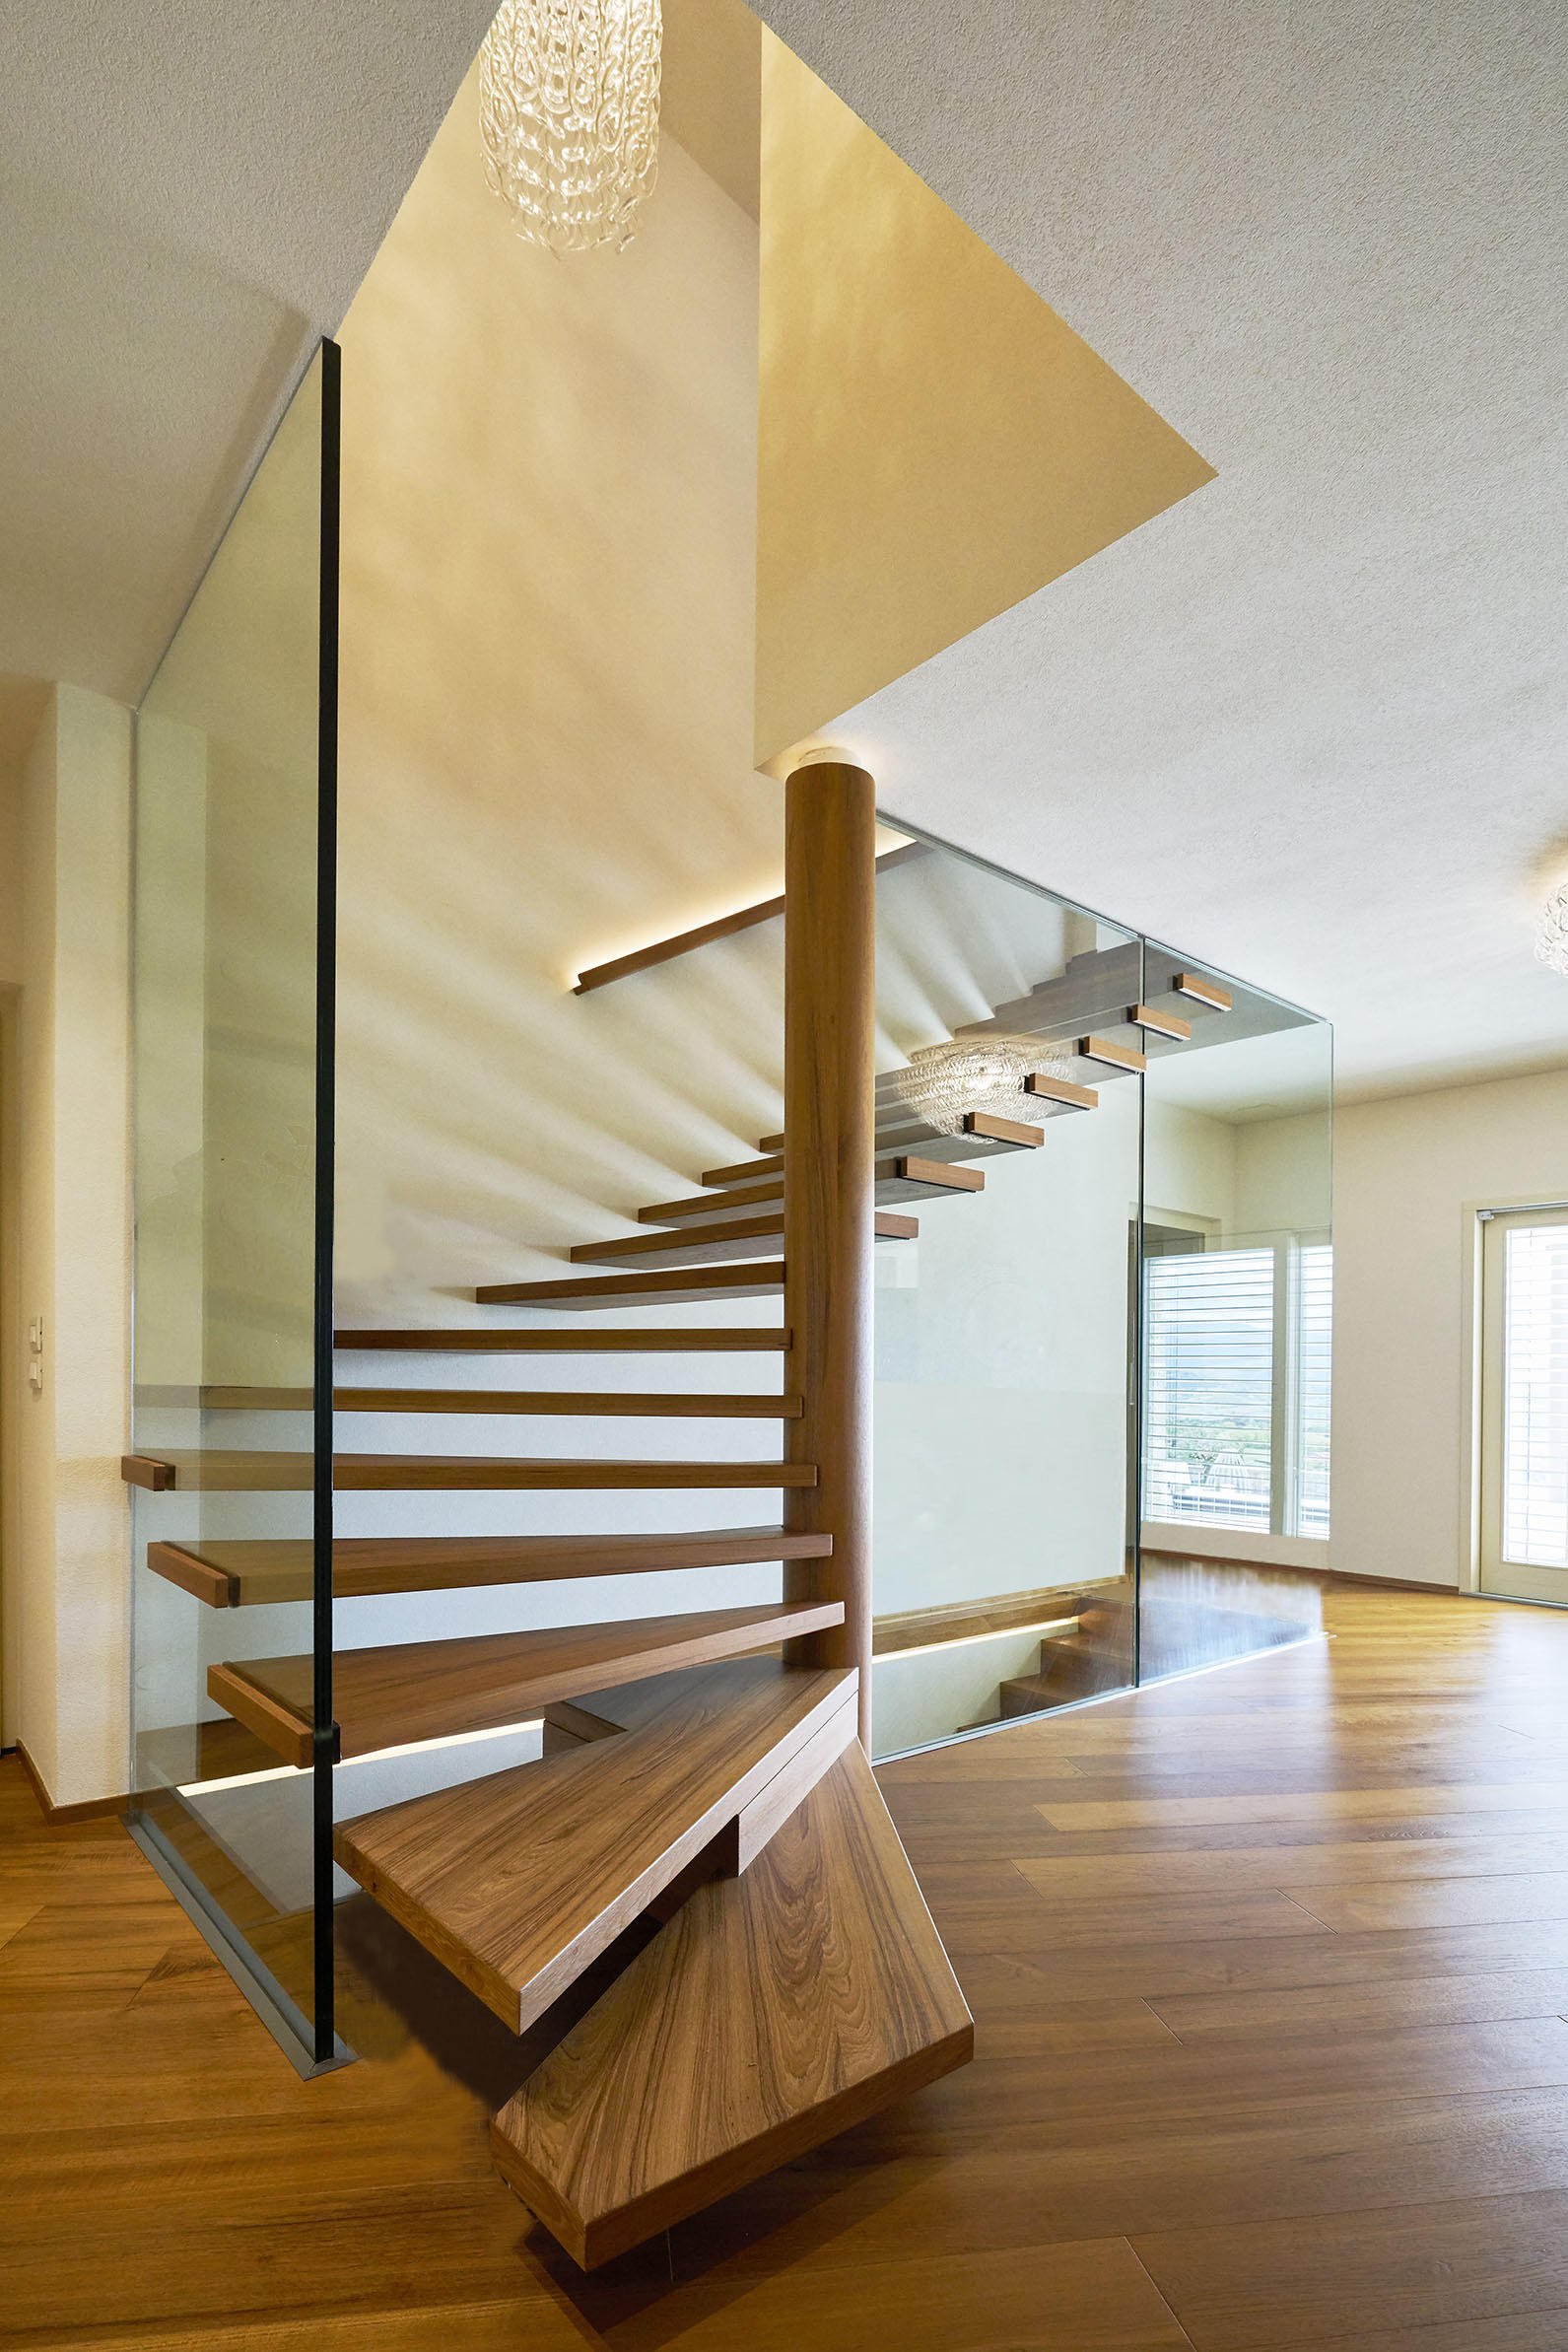 SPIKE - Staircase systems from Siller Treppen | Architonic